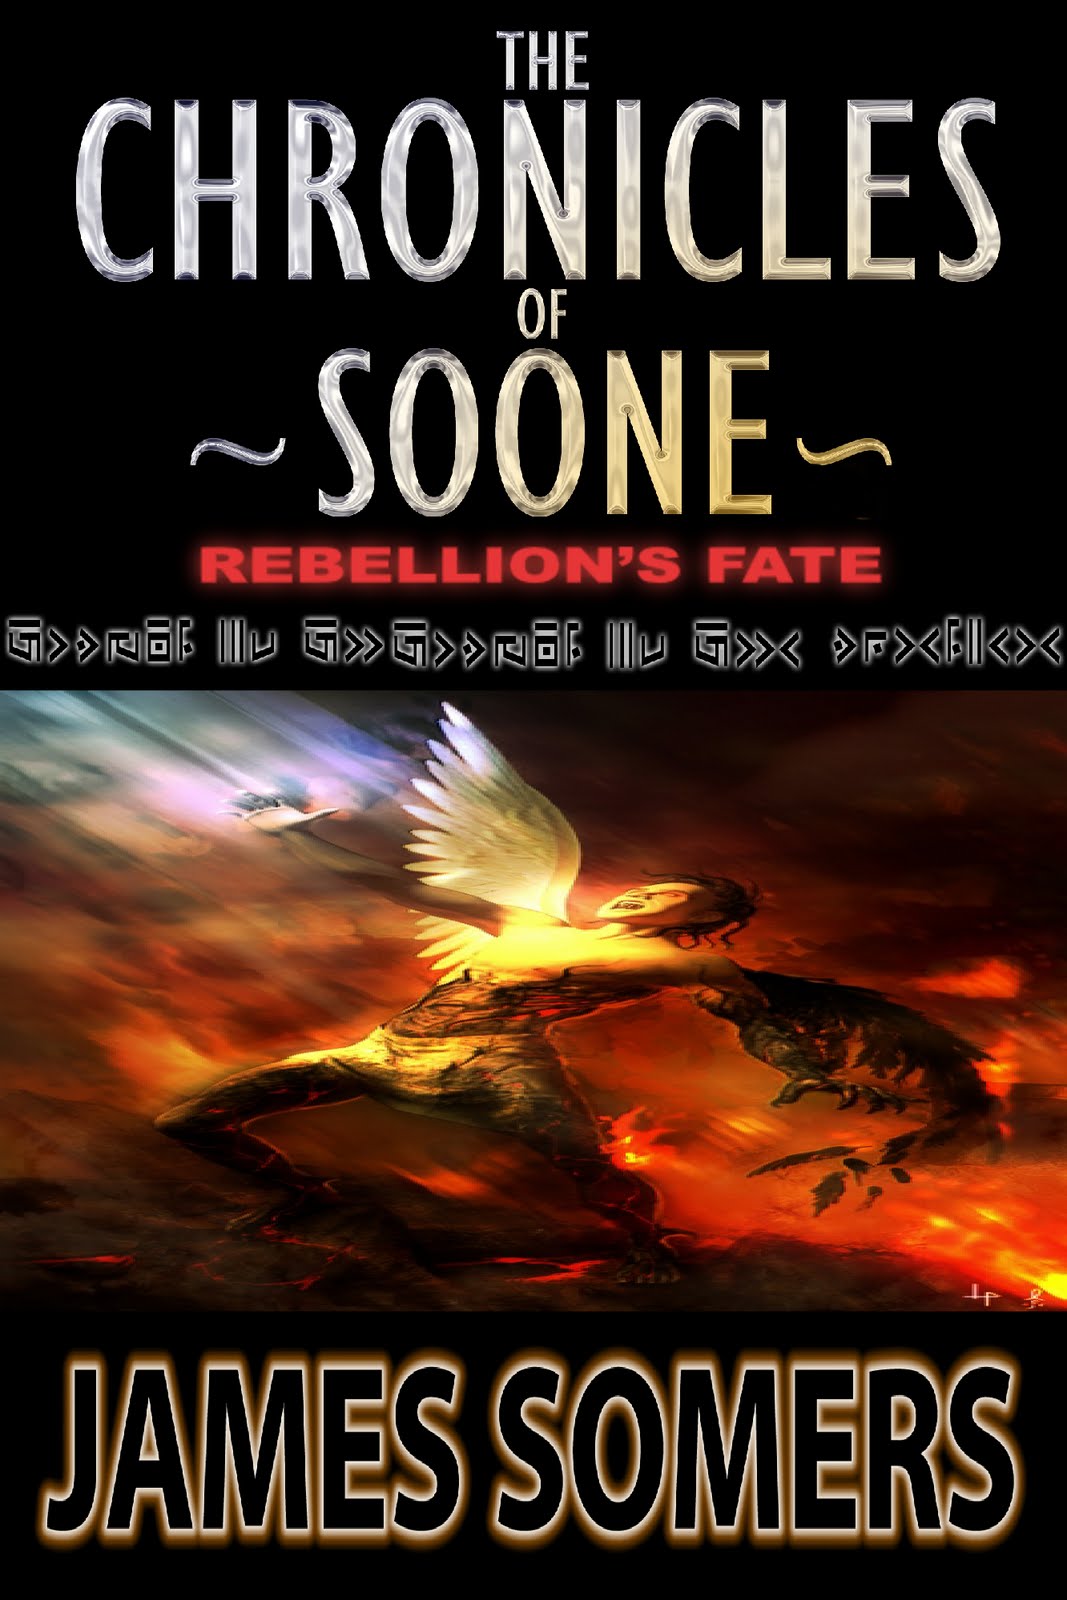 The Chronicles of Soone: Rebellion's Fate James Somers